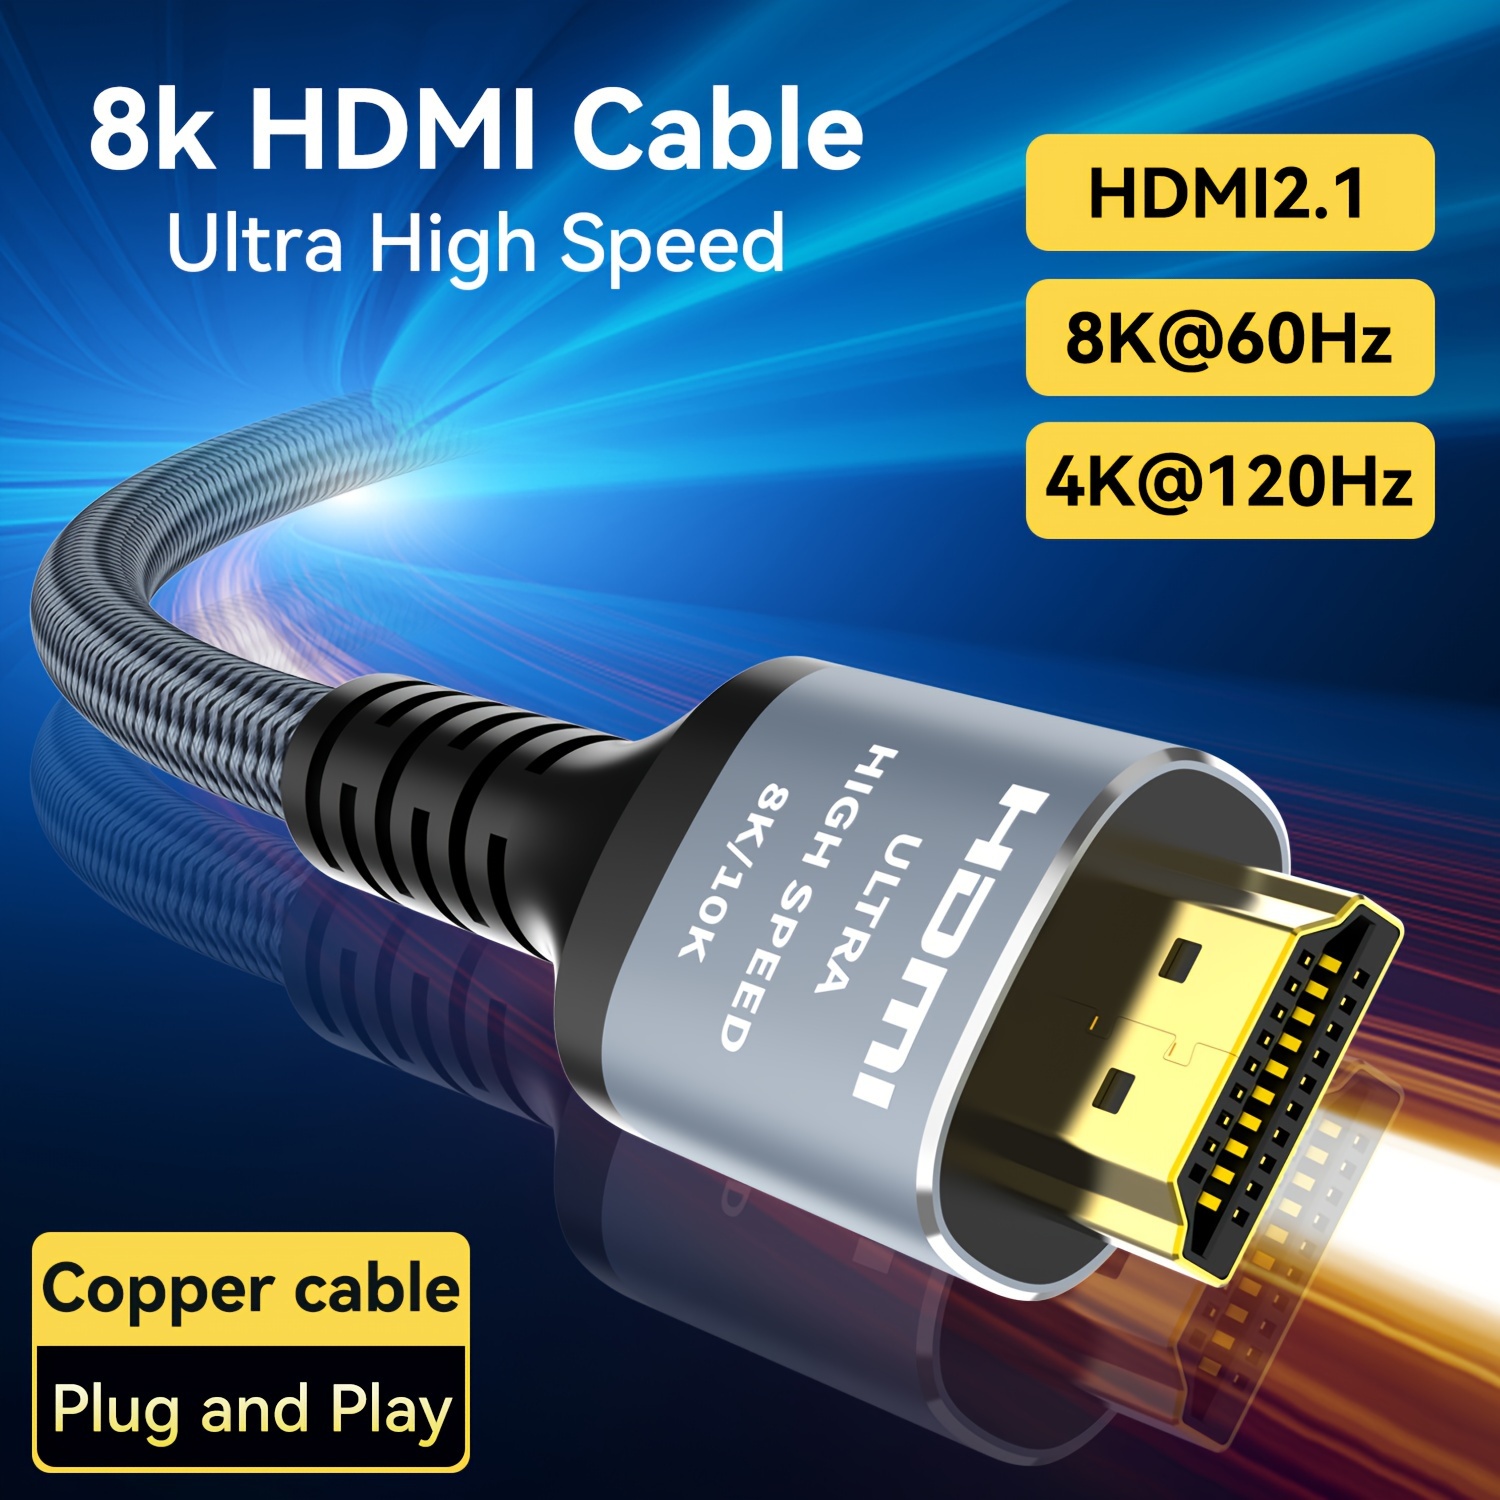 Moshou Hdmi 2.1 Cable 8k 60hz 4k 120hz 48gbps Earc Hdr Video Cord